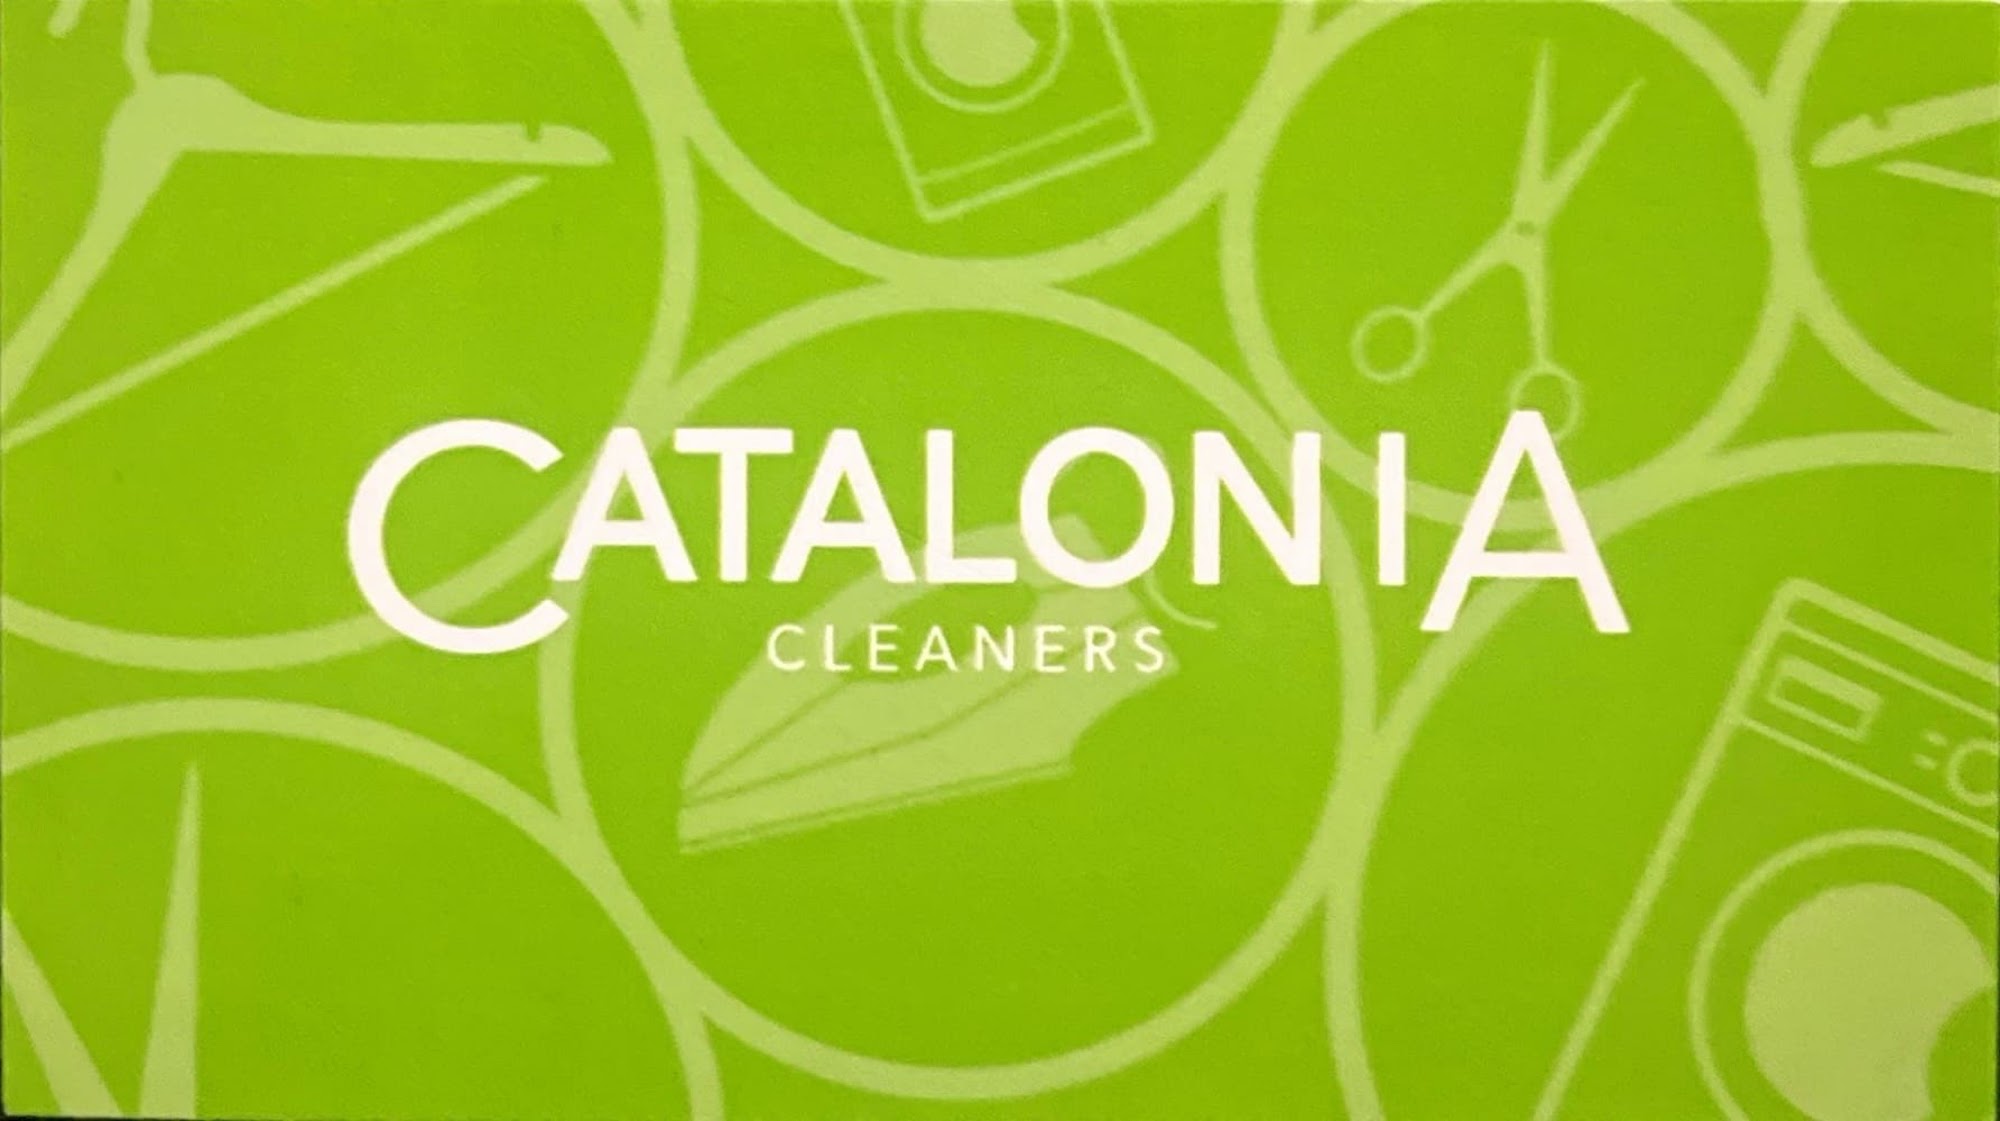 Catalonia Cleaners